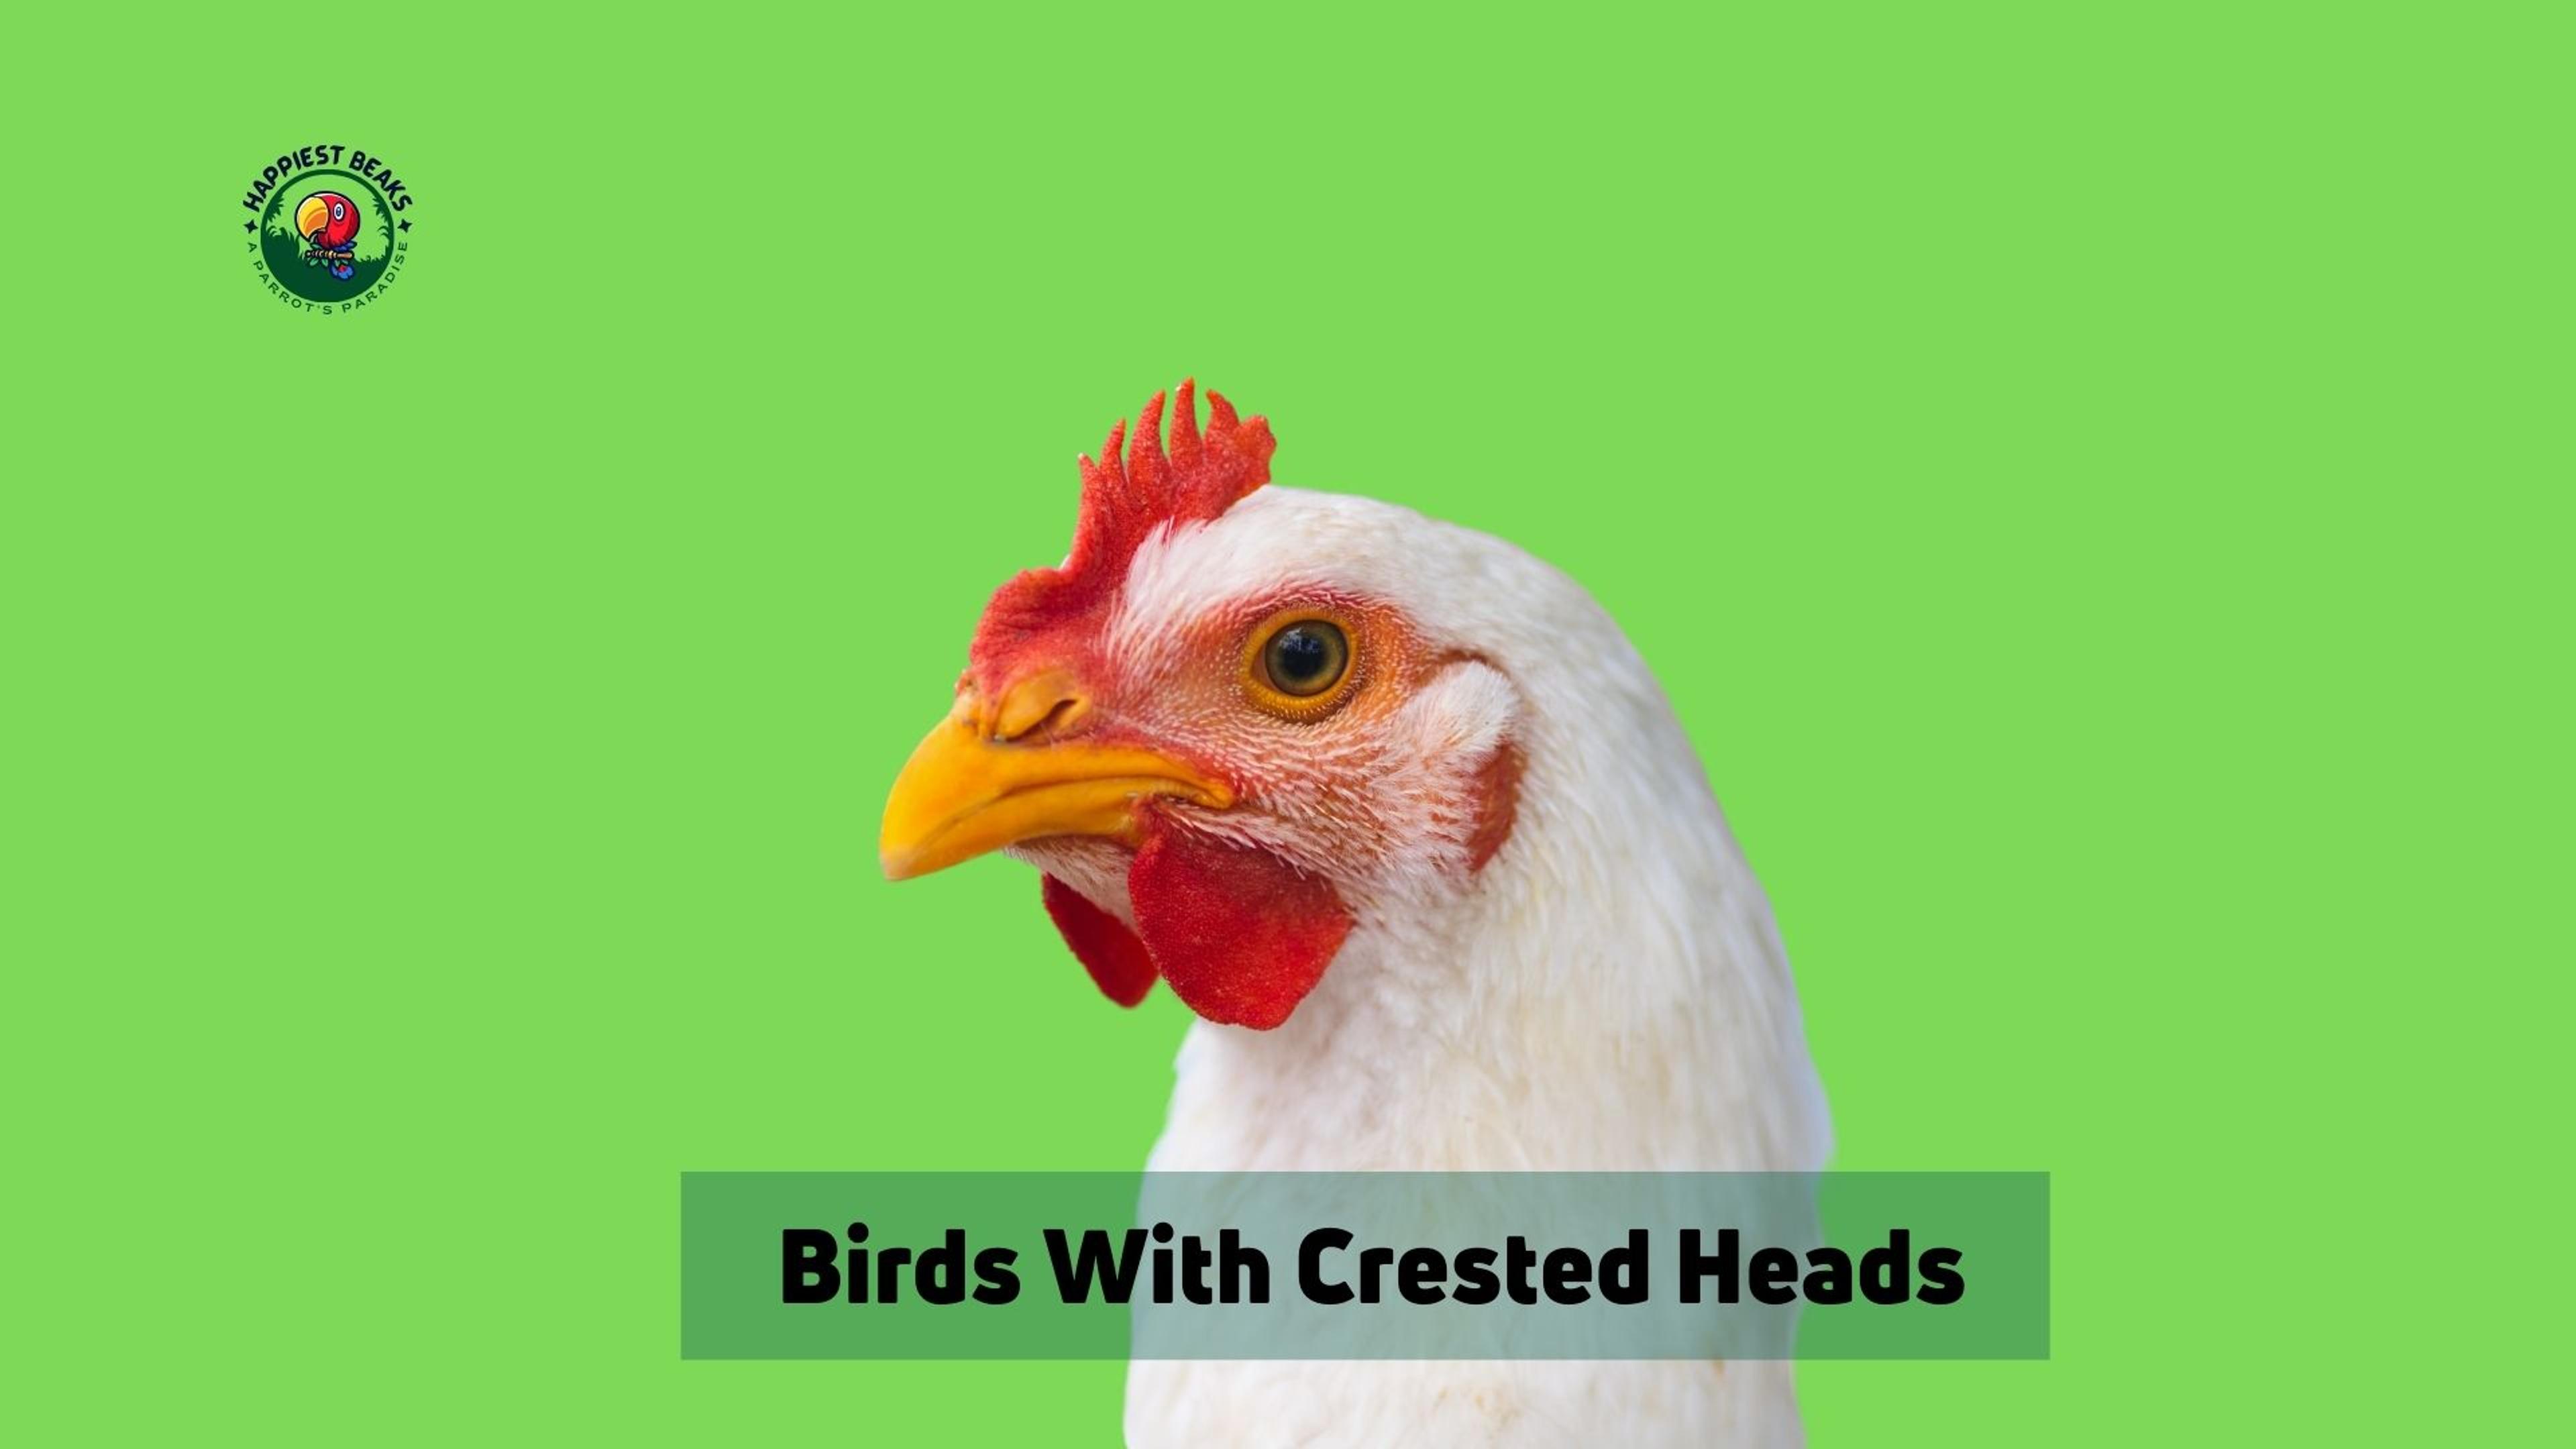 10 Birds With Crested Heads